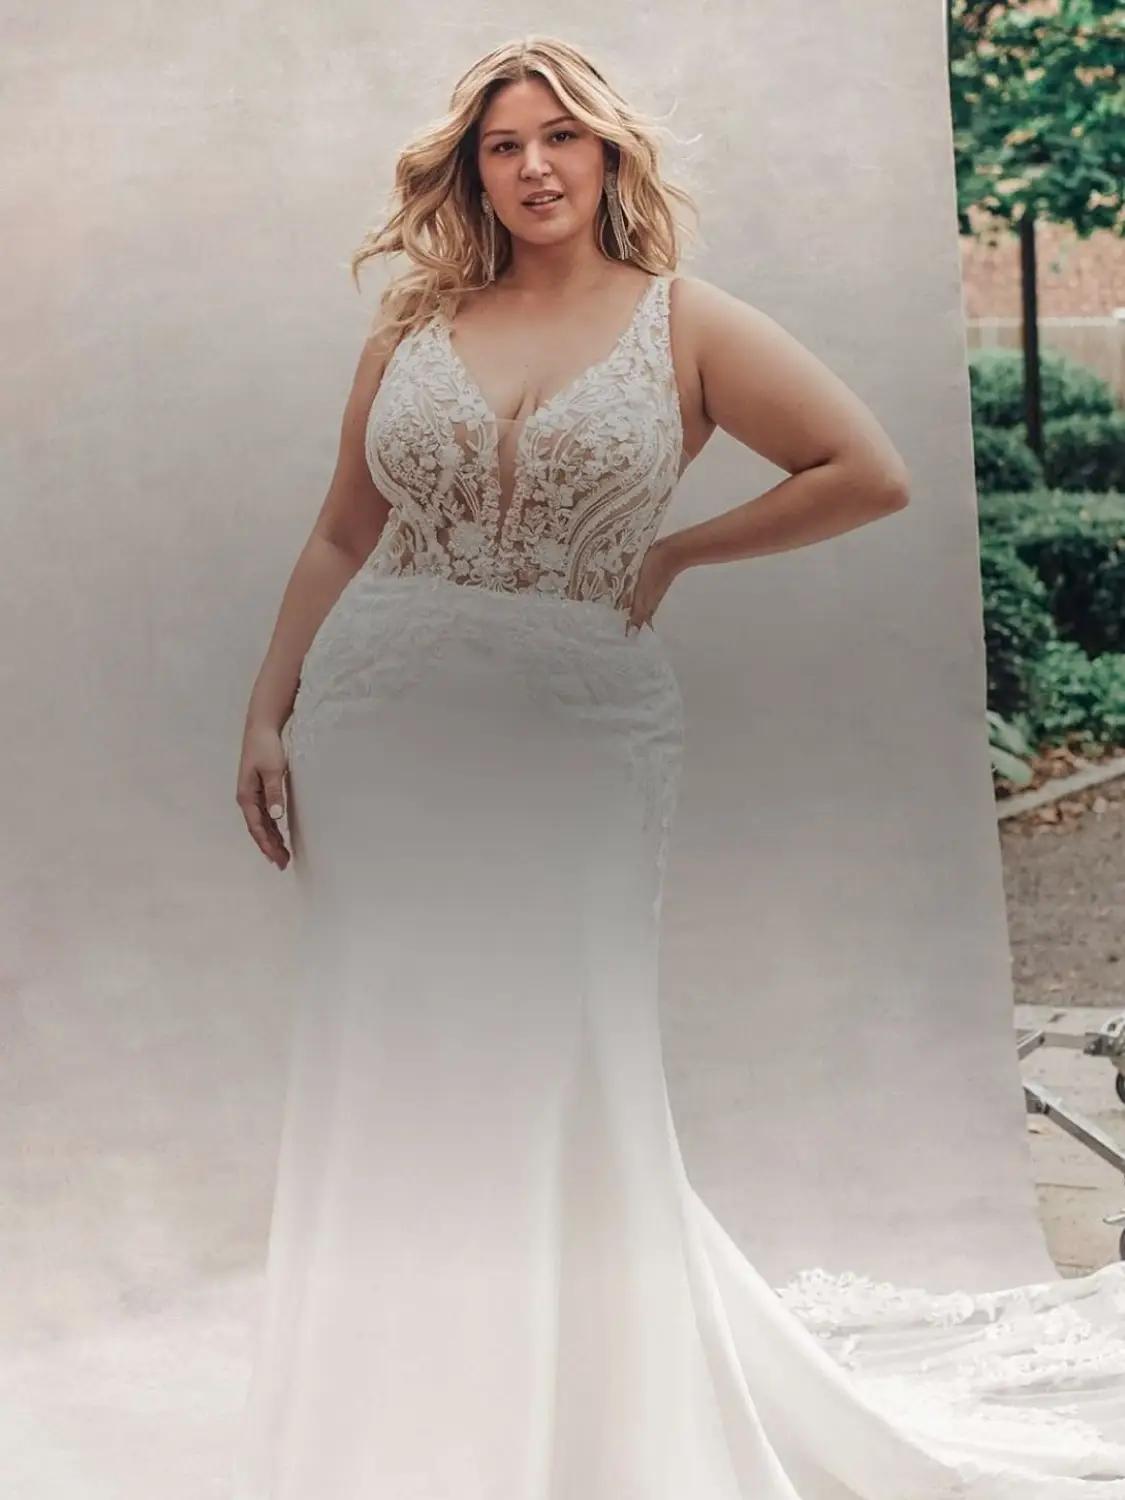 Plus size models wearing a white gown. Mobile image